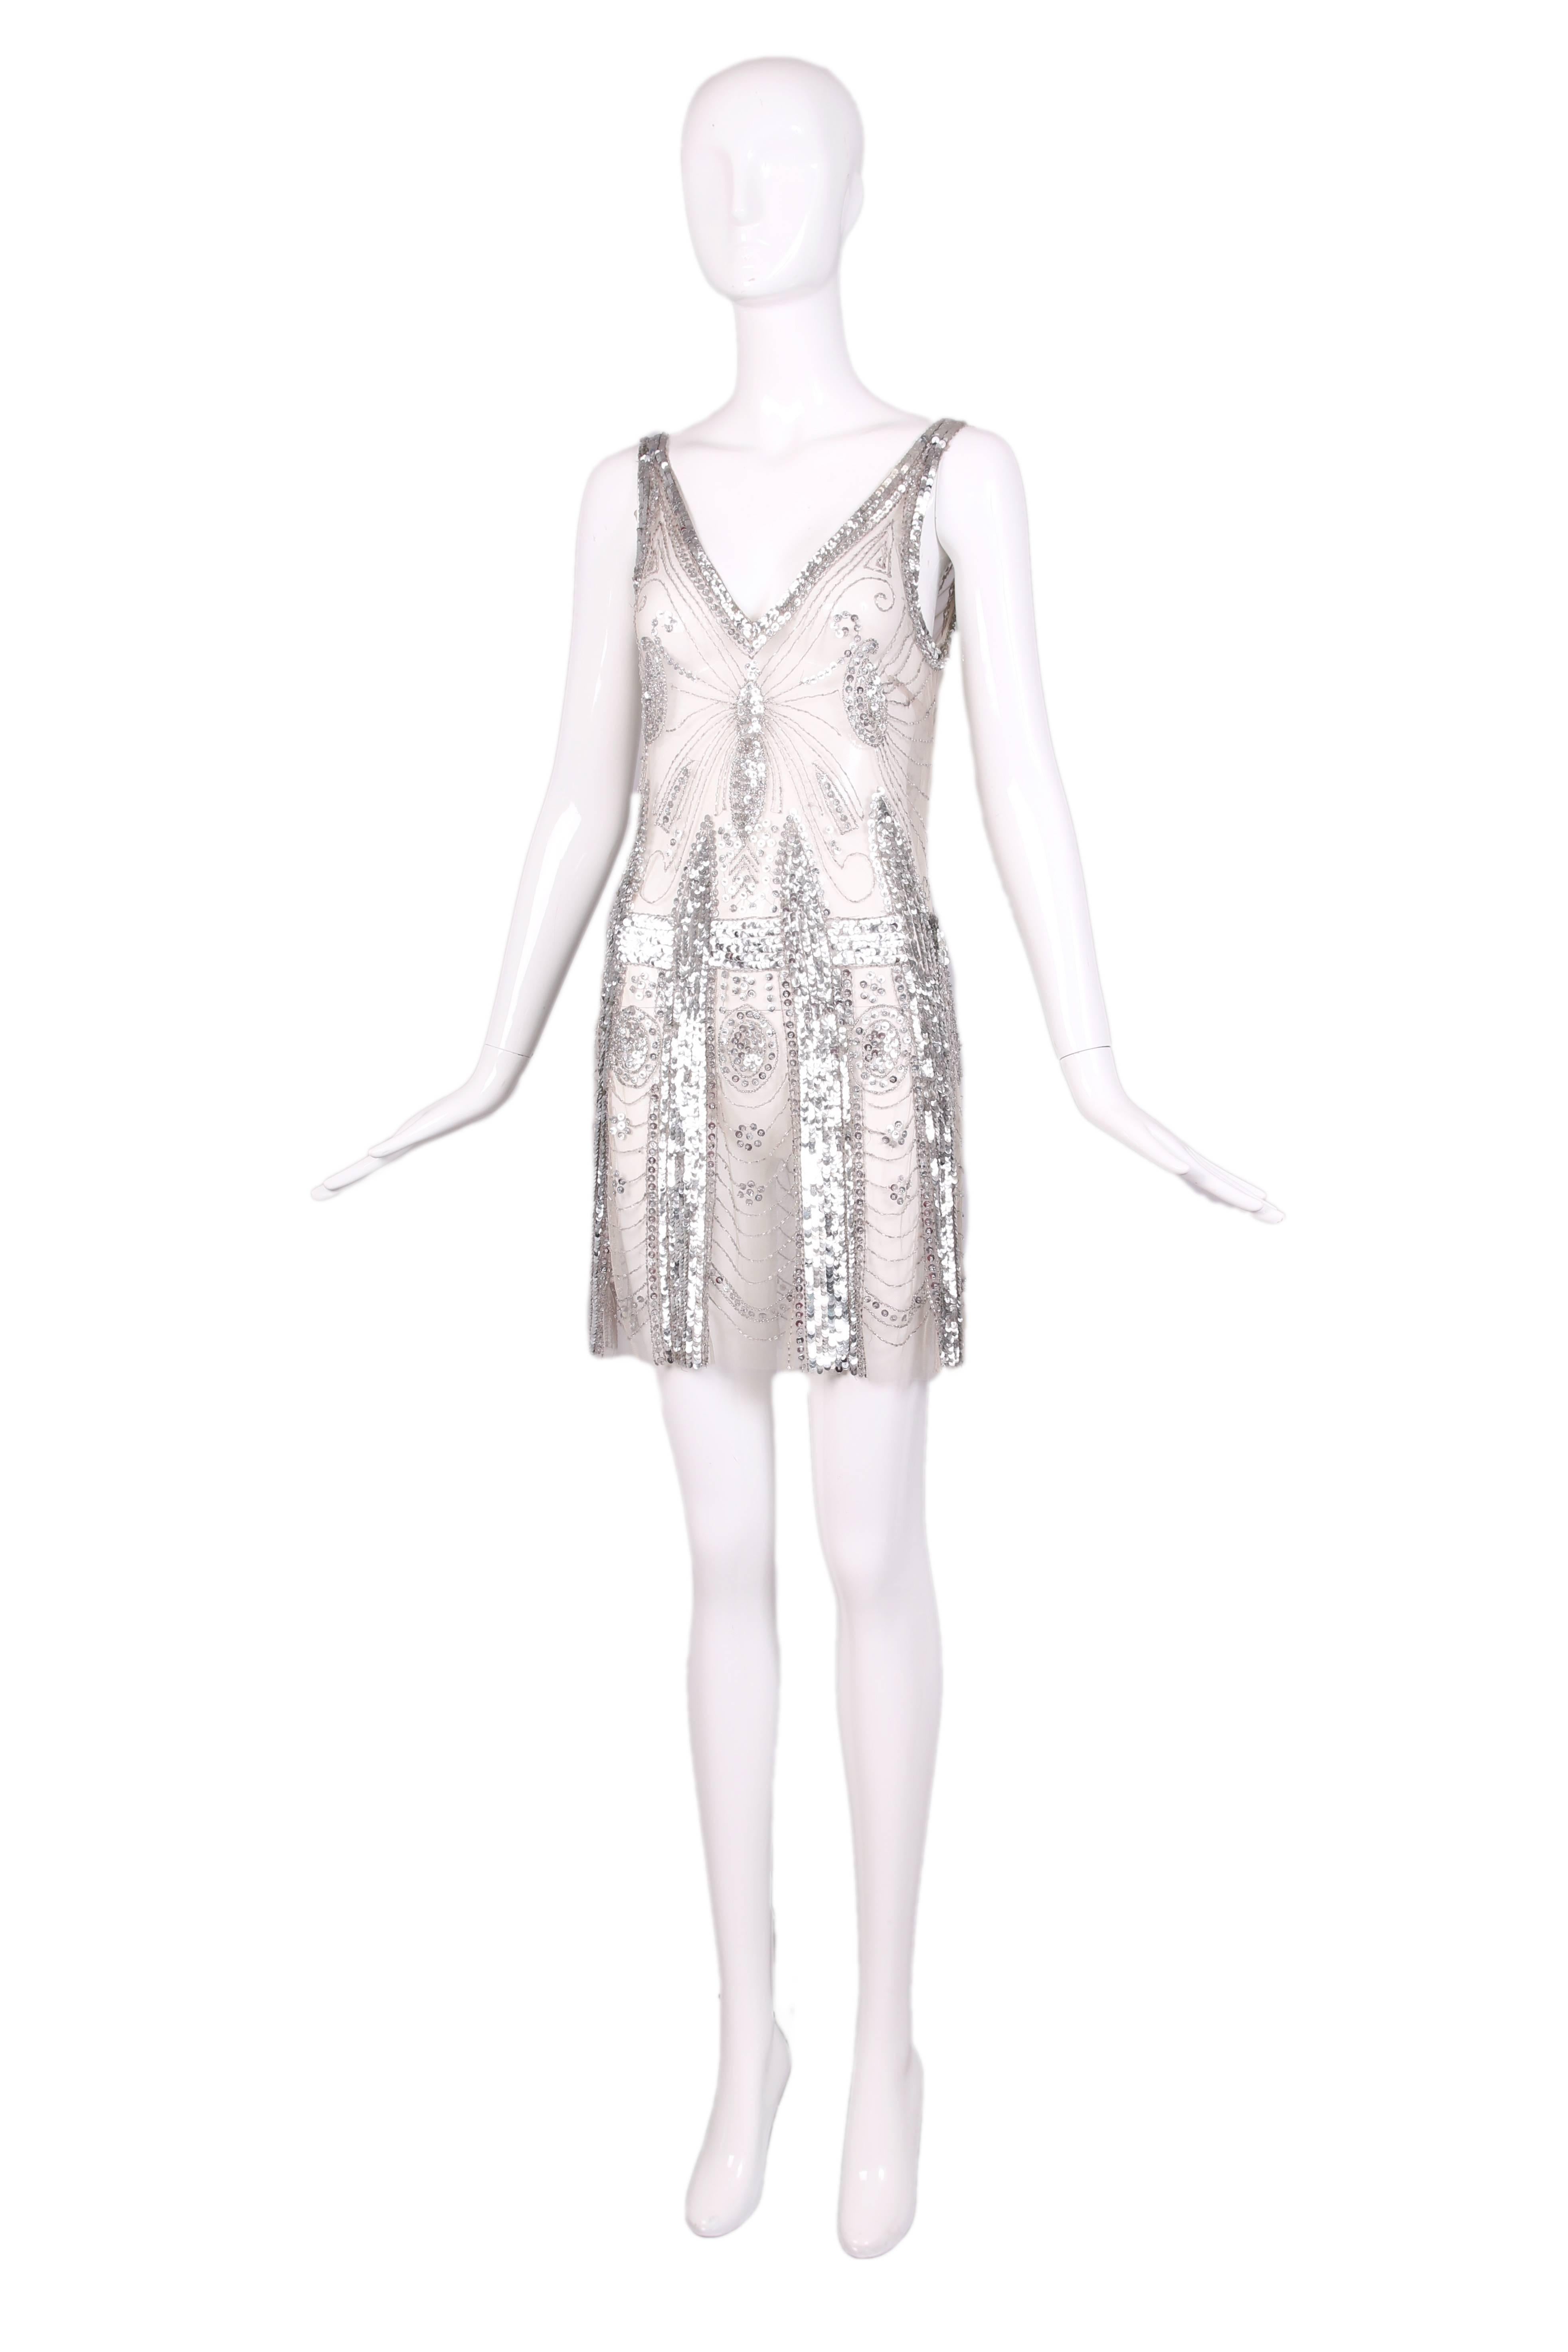 Pierre Balmain sheer cocktail dress embellished with silver sequins and clear bugle beads. Mirrored V-neckline in the front and back. In excellent condition. Size IT 40.
MEASUREMENTS:
Bust - 34"
Waist - 28"
Hip - 40"
Length -